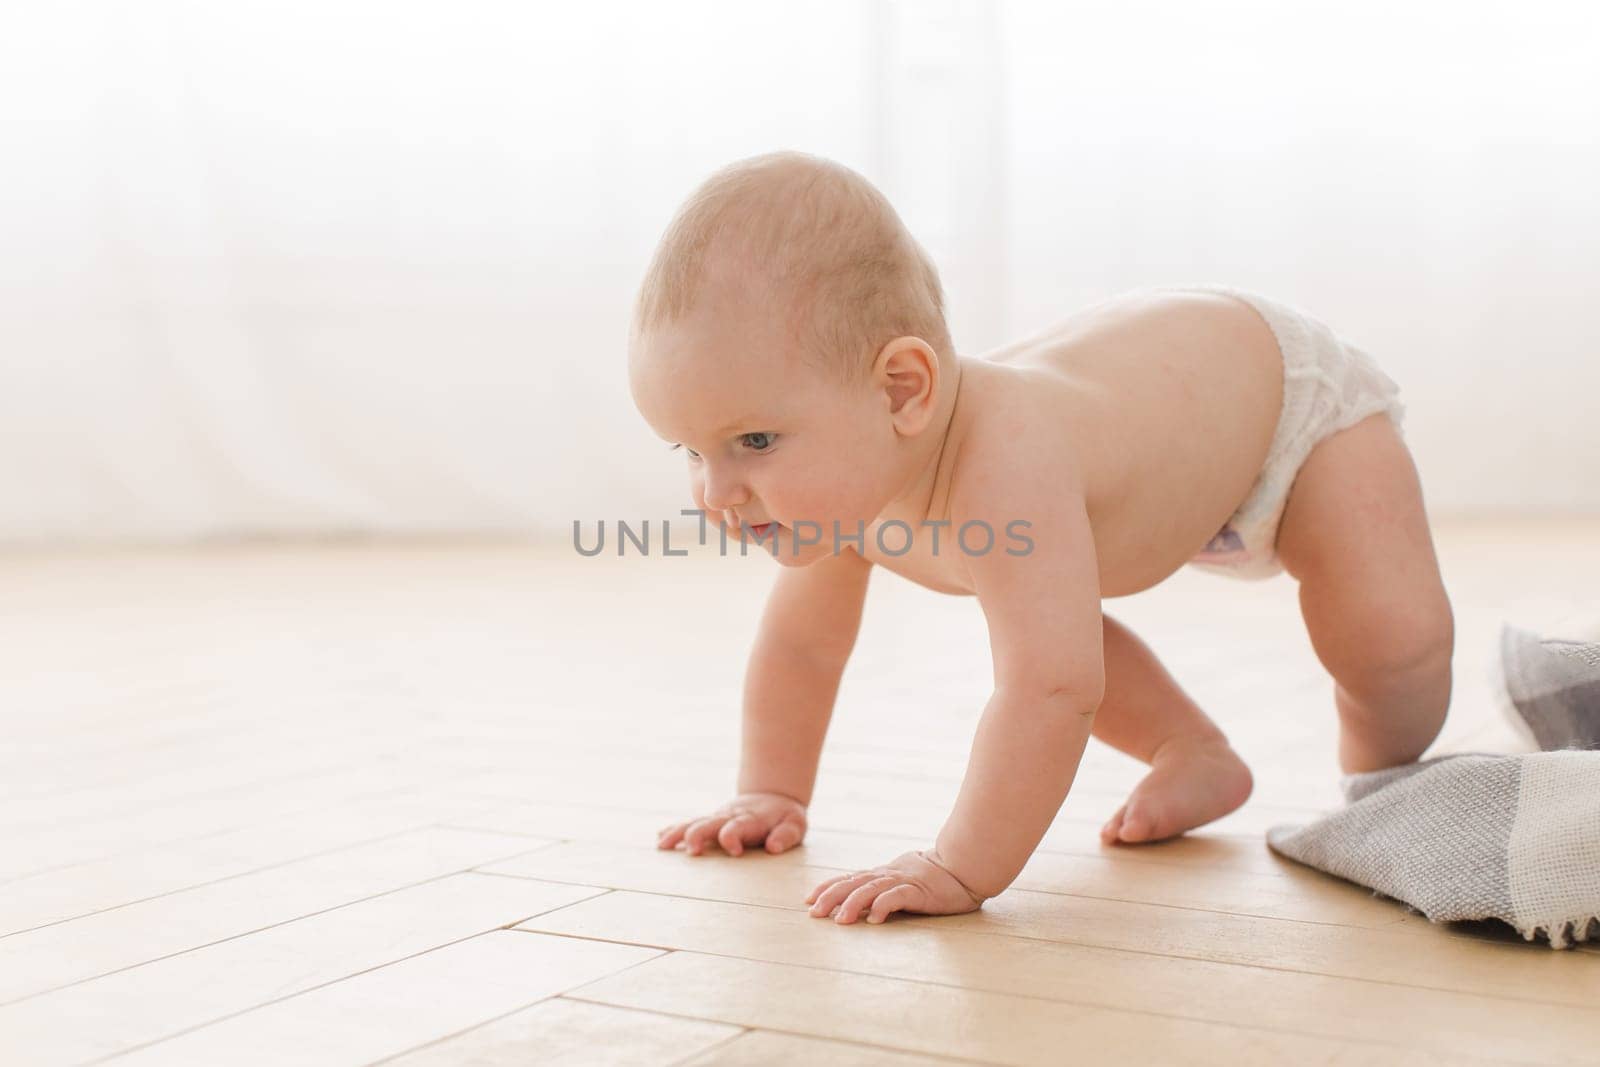 Small adorable infant standing on all fours on wooden floor at home.